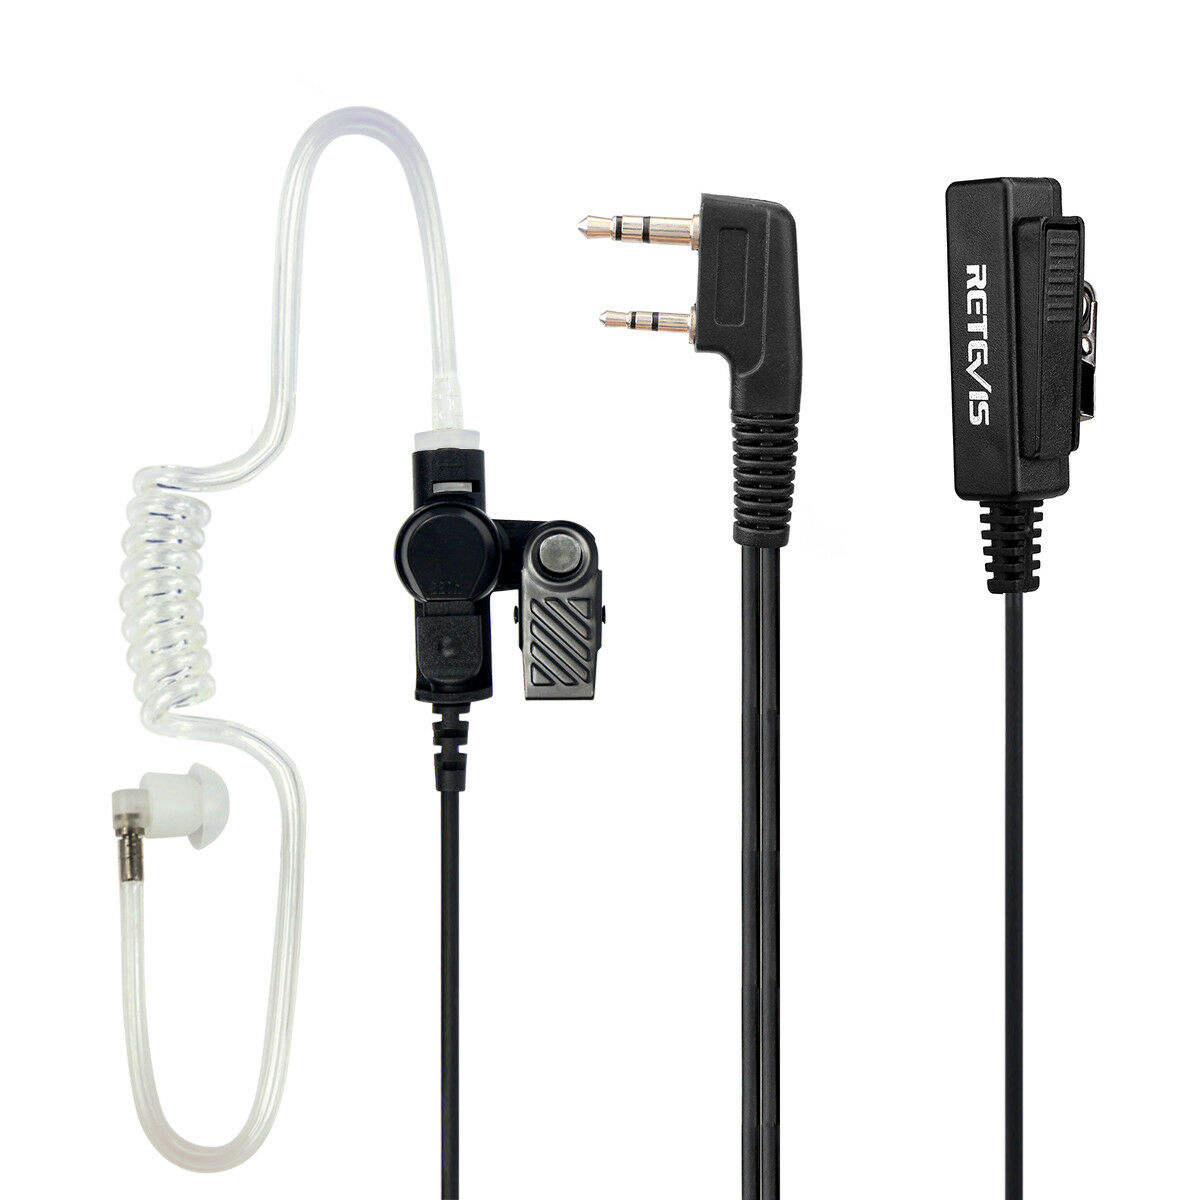 Big PTT 2-Wire Kenwood 2-Pin Covert Acoustic Tube Earpiece for Kenwood Radios